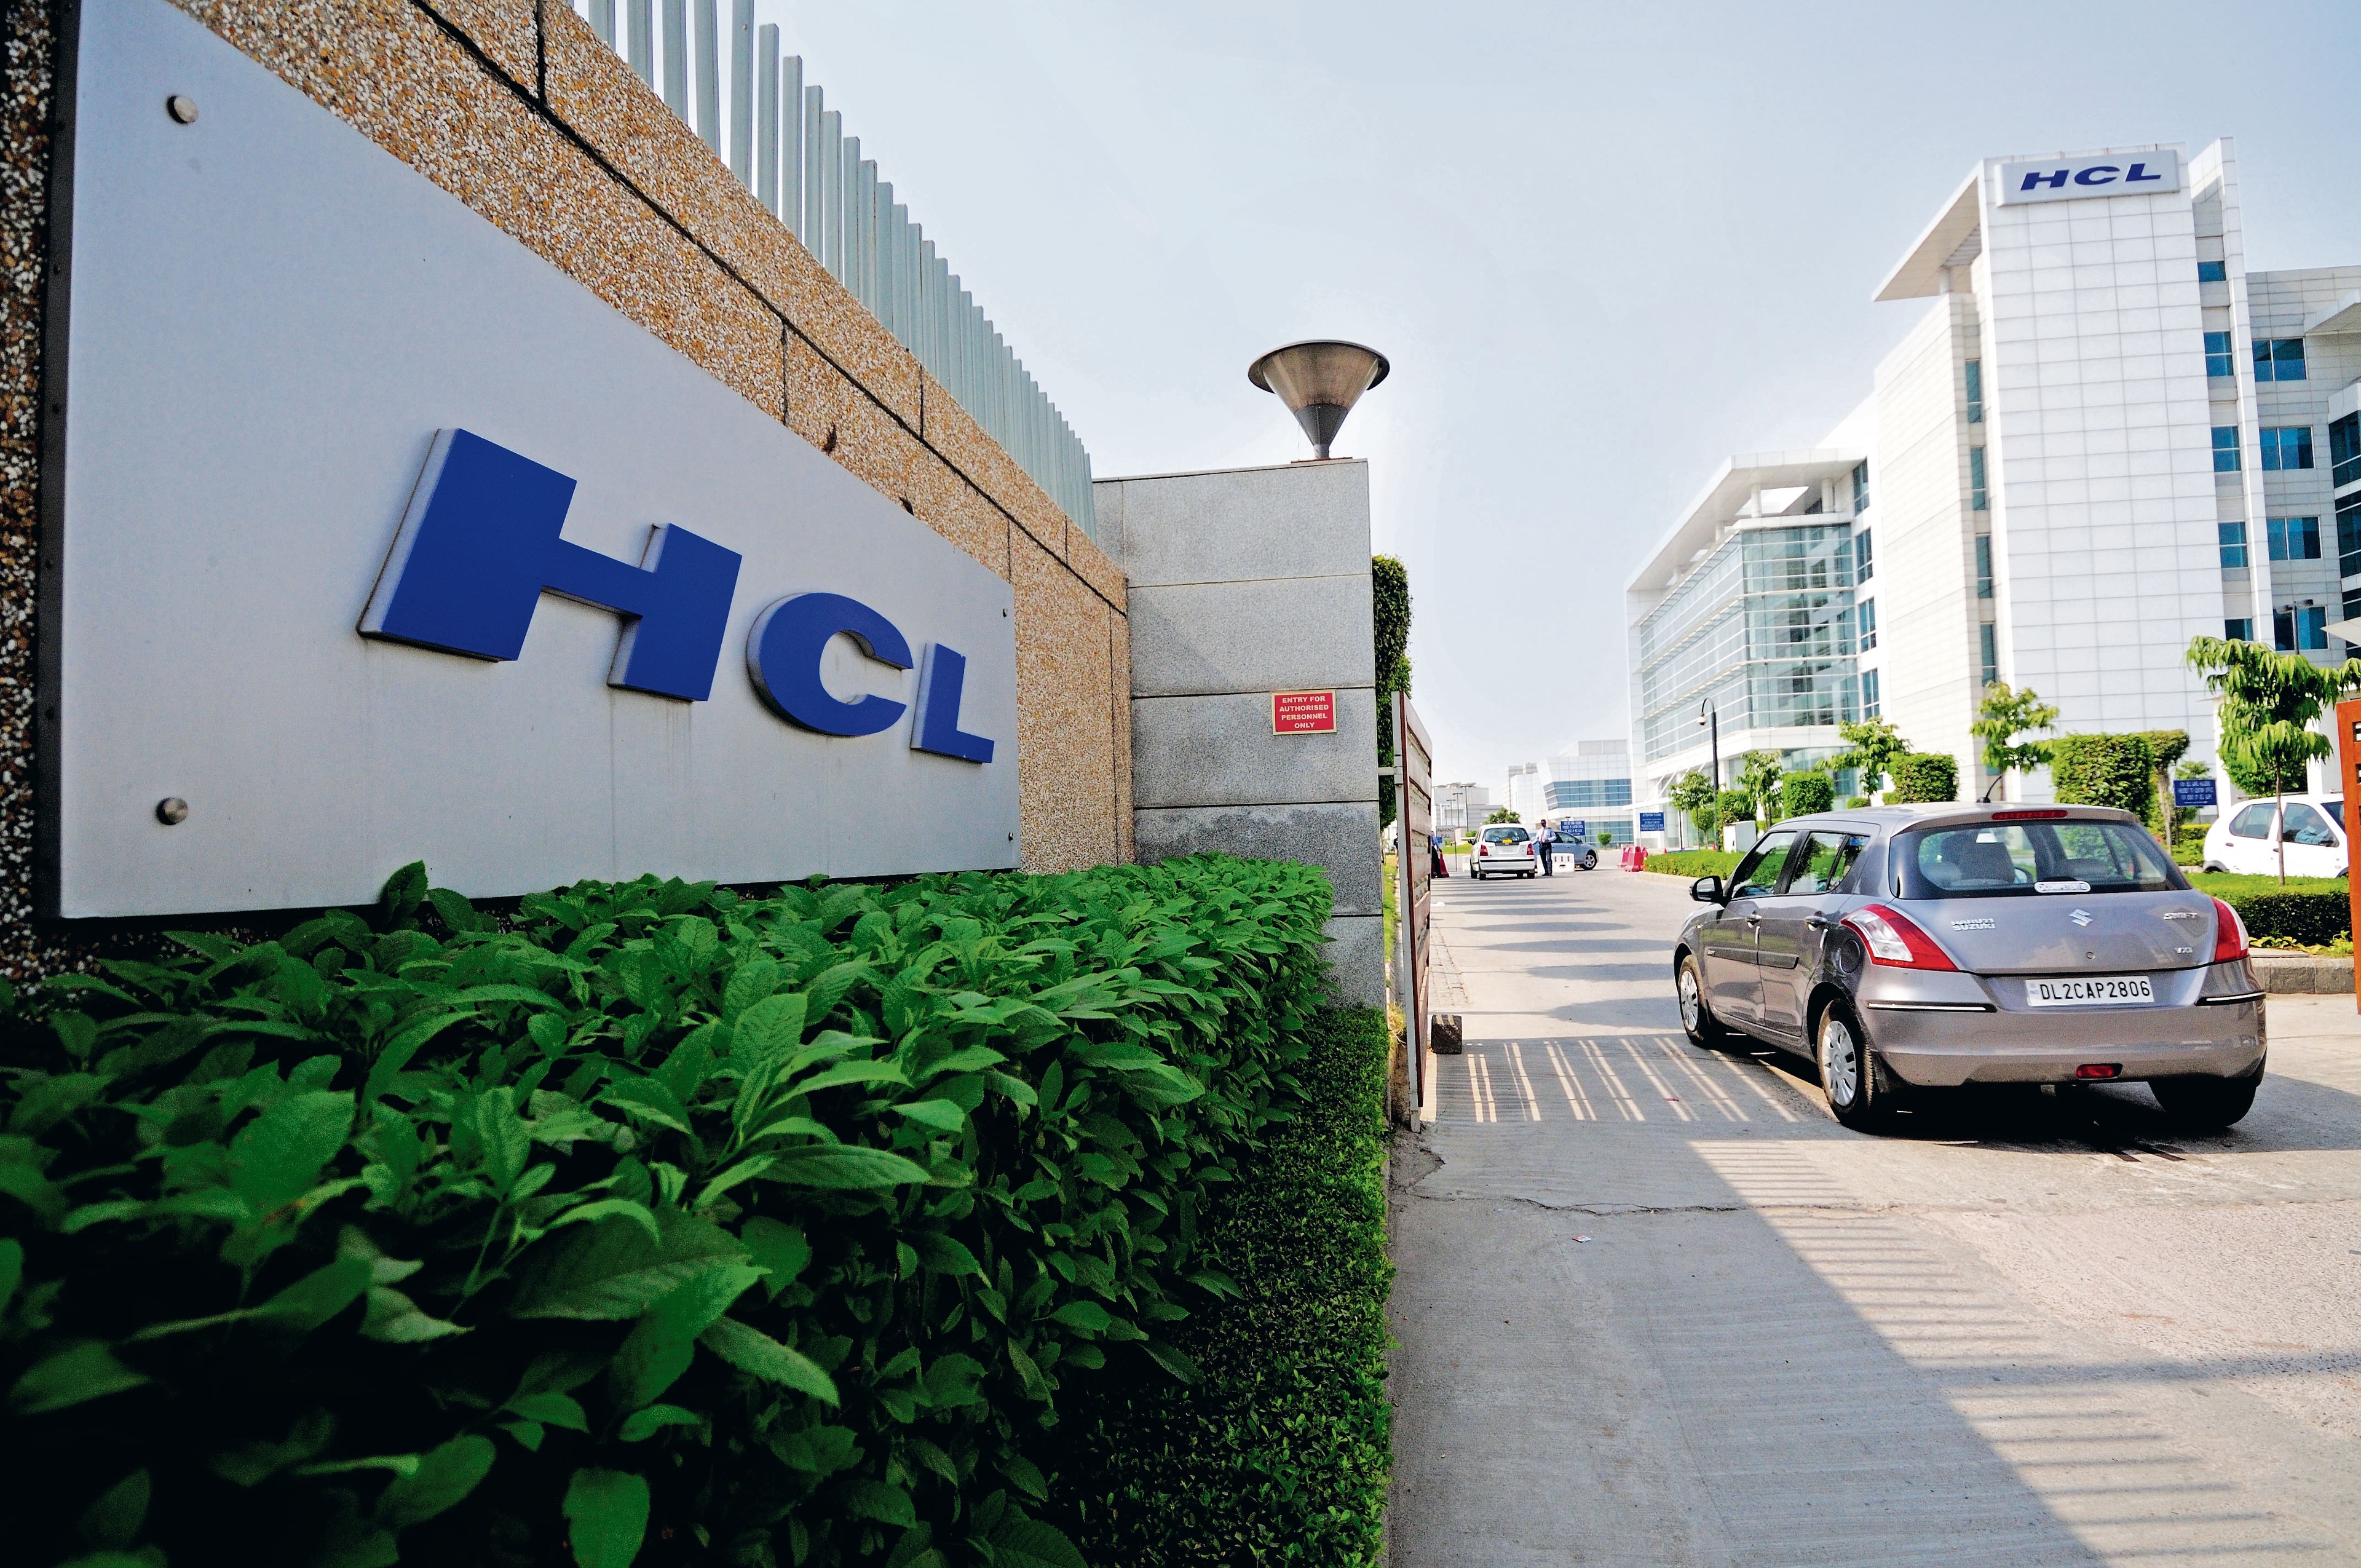 HCL Technologies: The brokerage has a target price of  <span class='webrupee'>₹</span>1,466 per share for the stock, implying an upside of 23 percent. HCL Tech is amongst the top four IT services companies based out of India. As per the brokerage, At CMP the stock is trading at a significant discount to the other large-cap IT companies like Infosys and TCS and offers tremendous value at current levels given market leader status in Infrastructure management. It added that strong deal wins will help drive growth in the services business, which should make up for any shortfall in the product business.